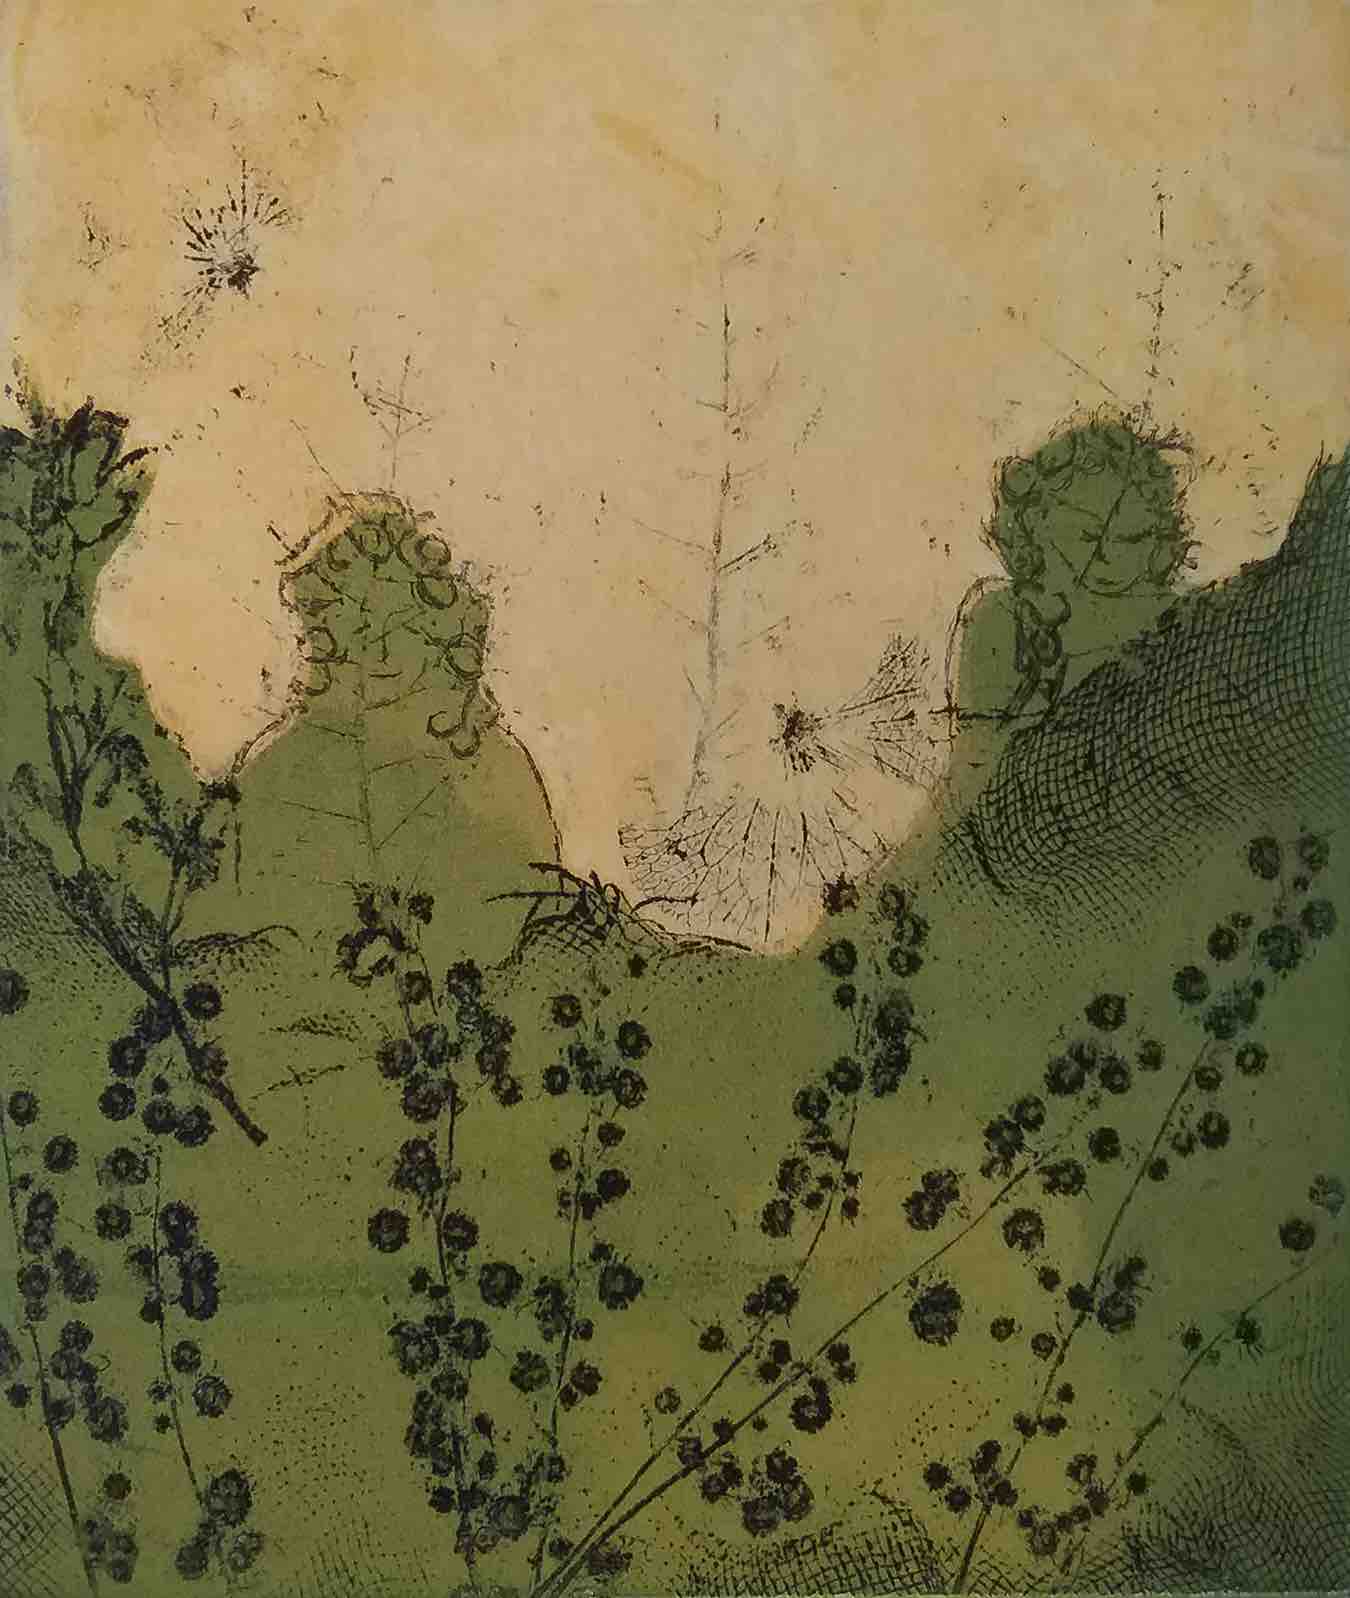 From the base of this print rises an organic, plant-like shape, decorated with sketched berries/seeds in black ink. The green shape advances upward, reaching into a sandy, barren expanse.